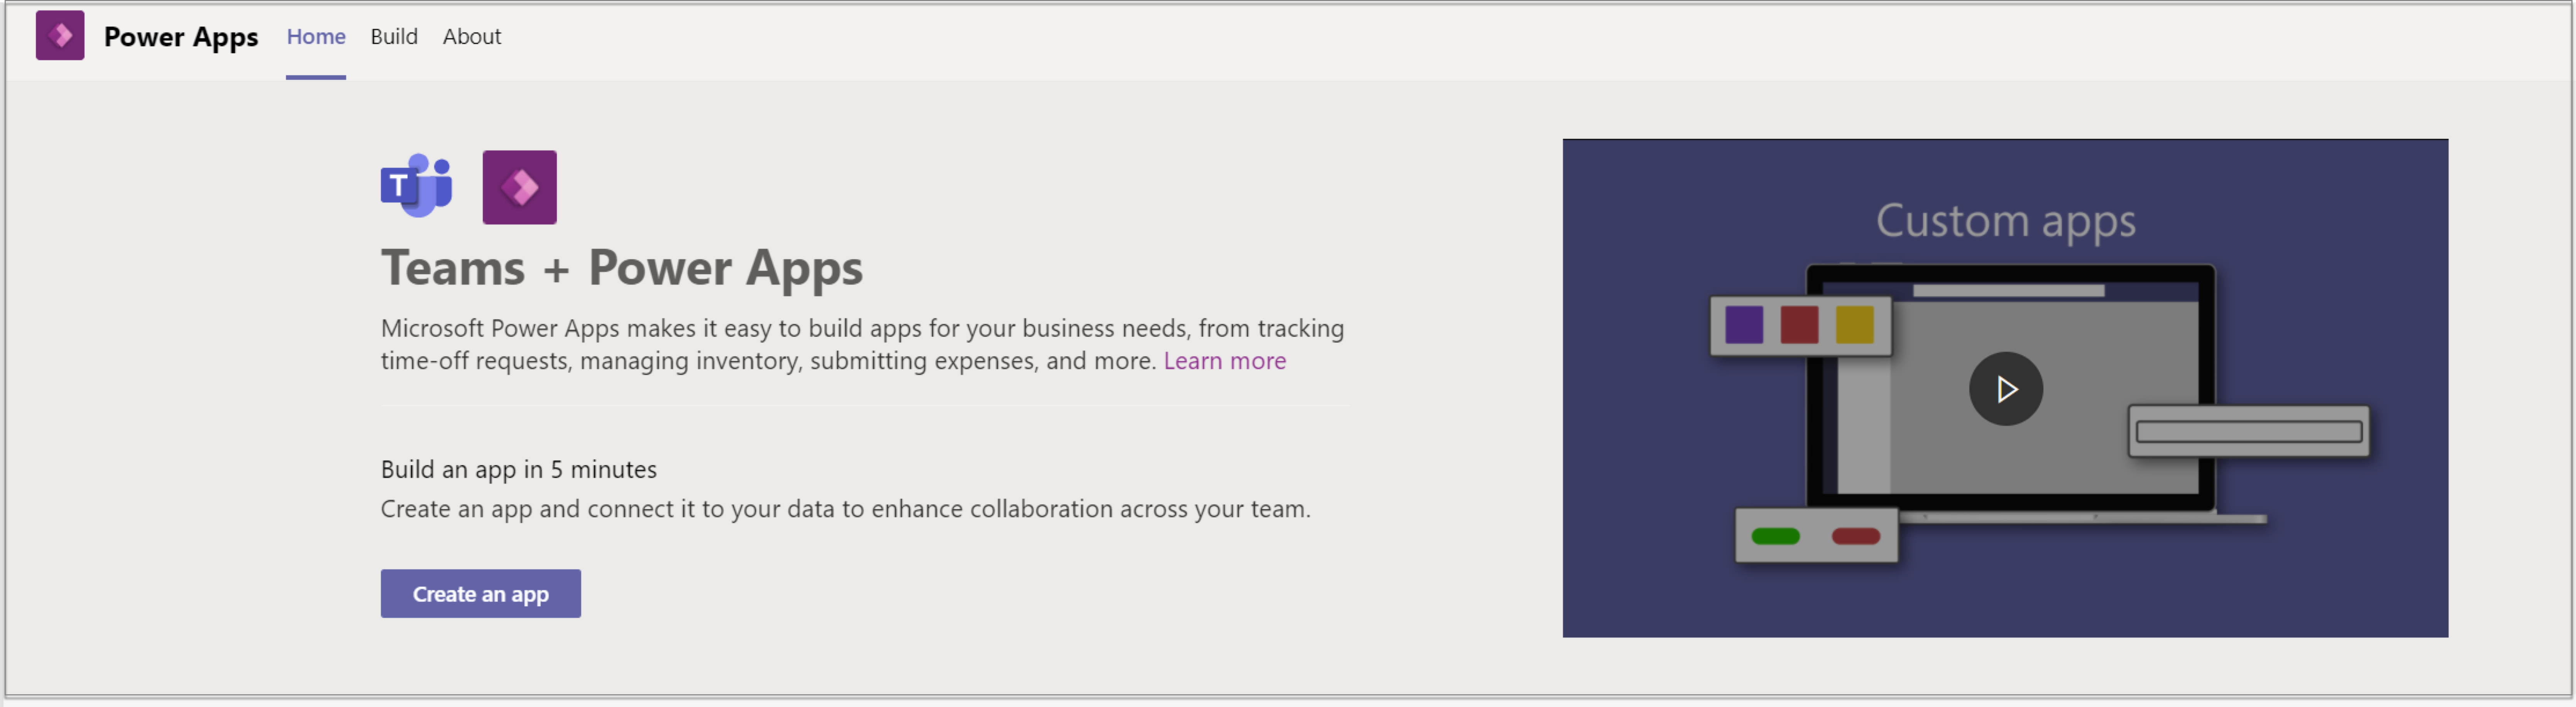 The main screen for Power Apps app in Teams.